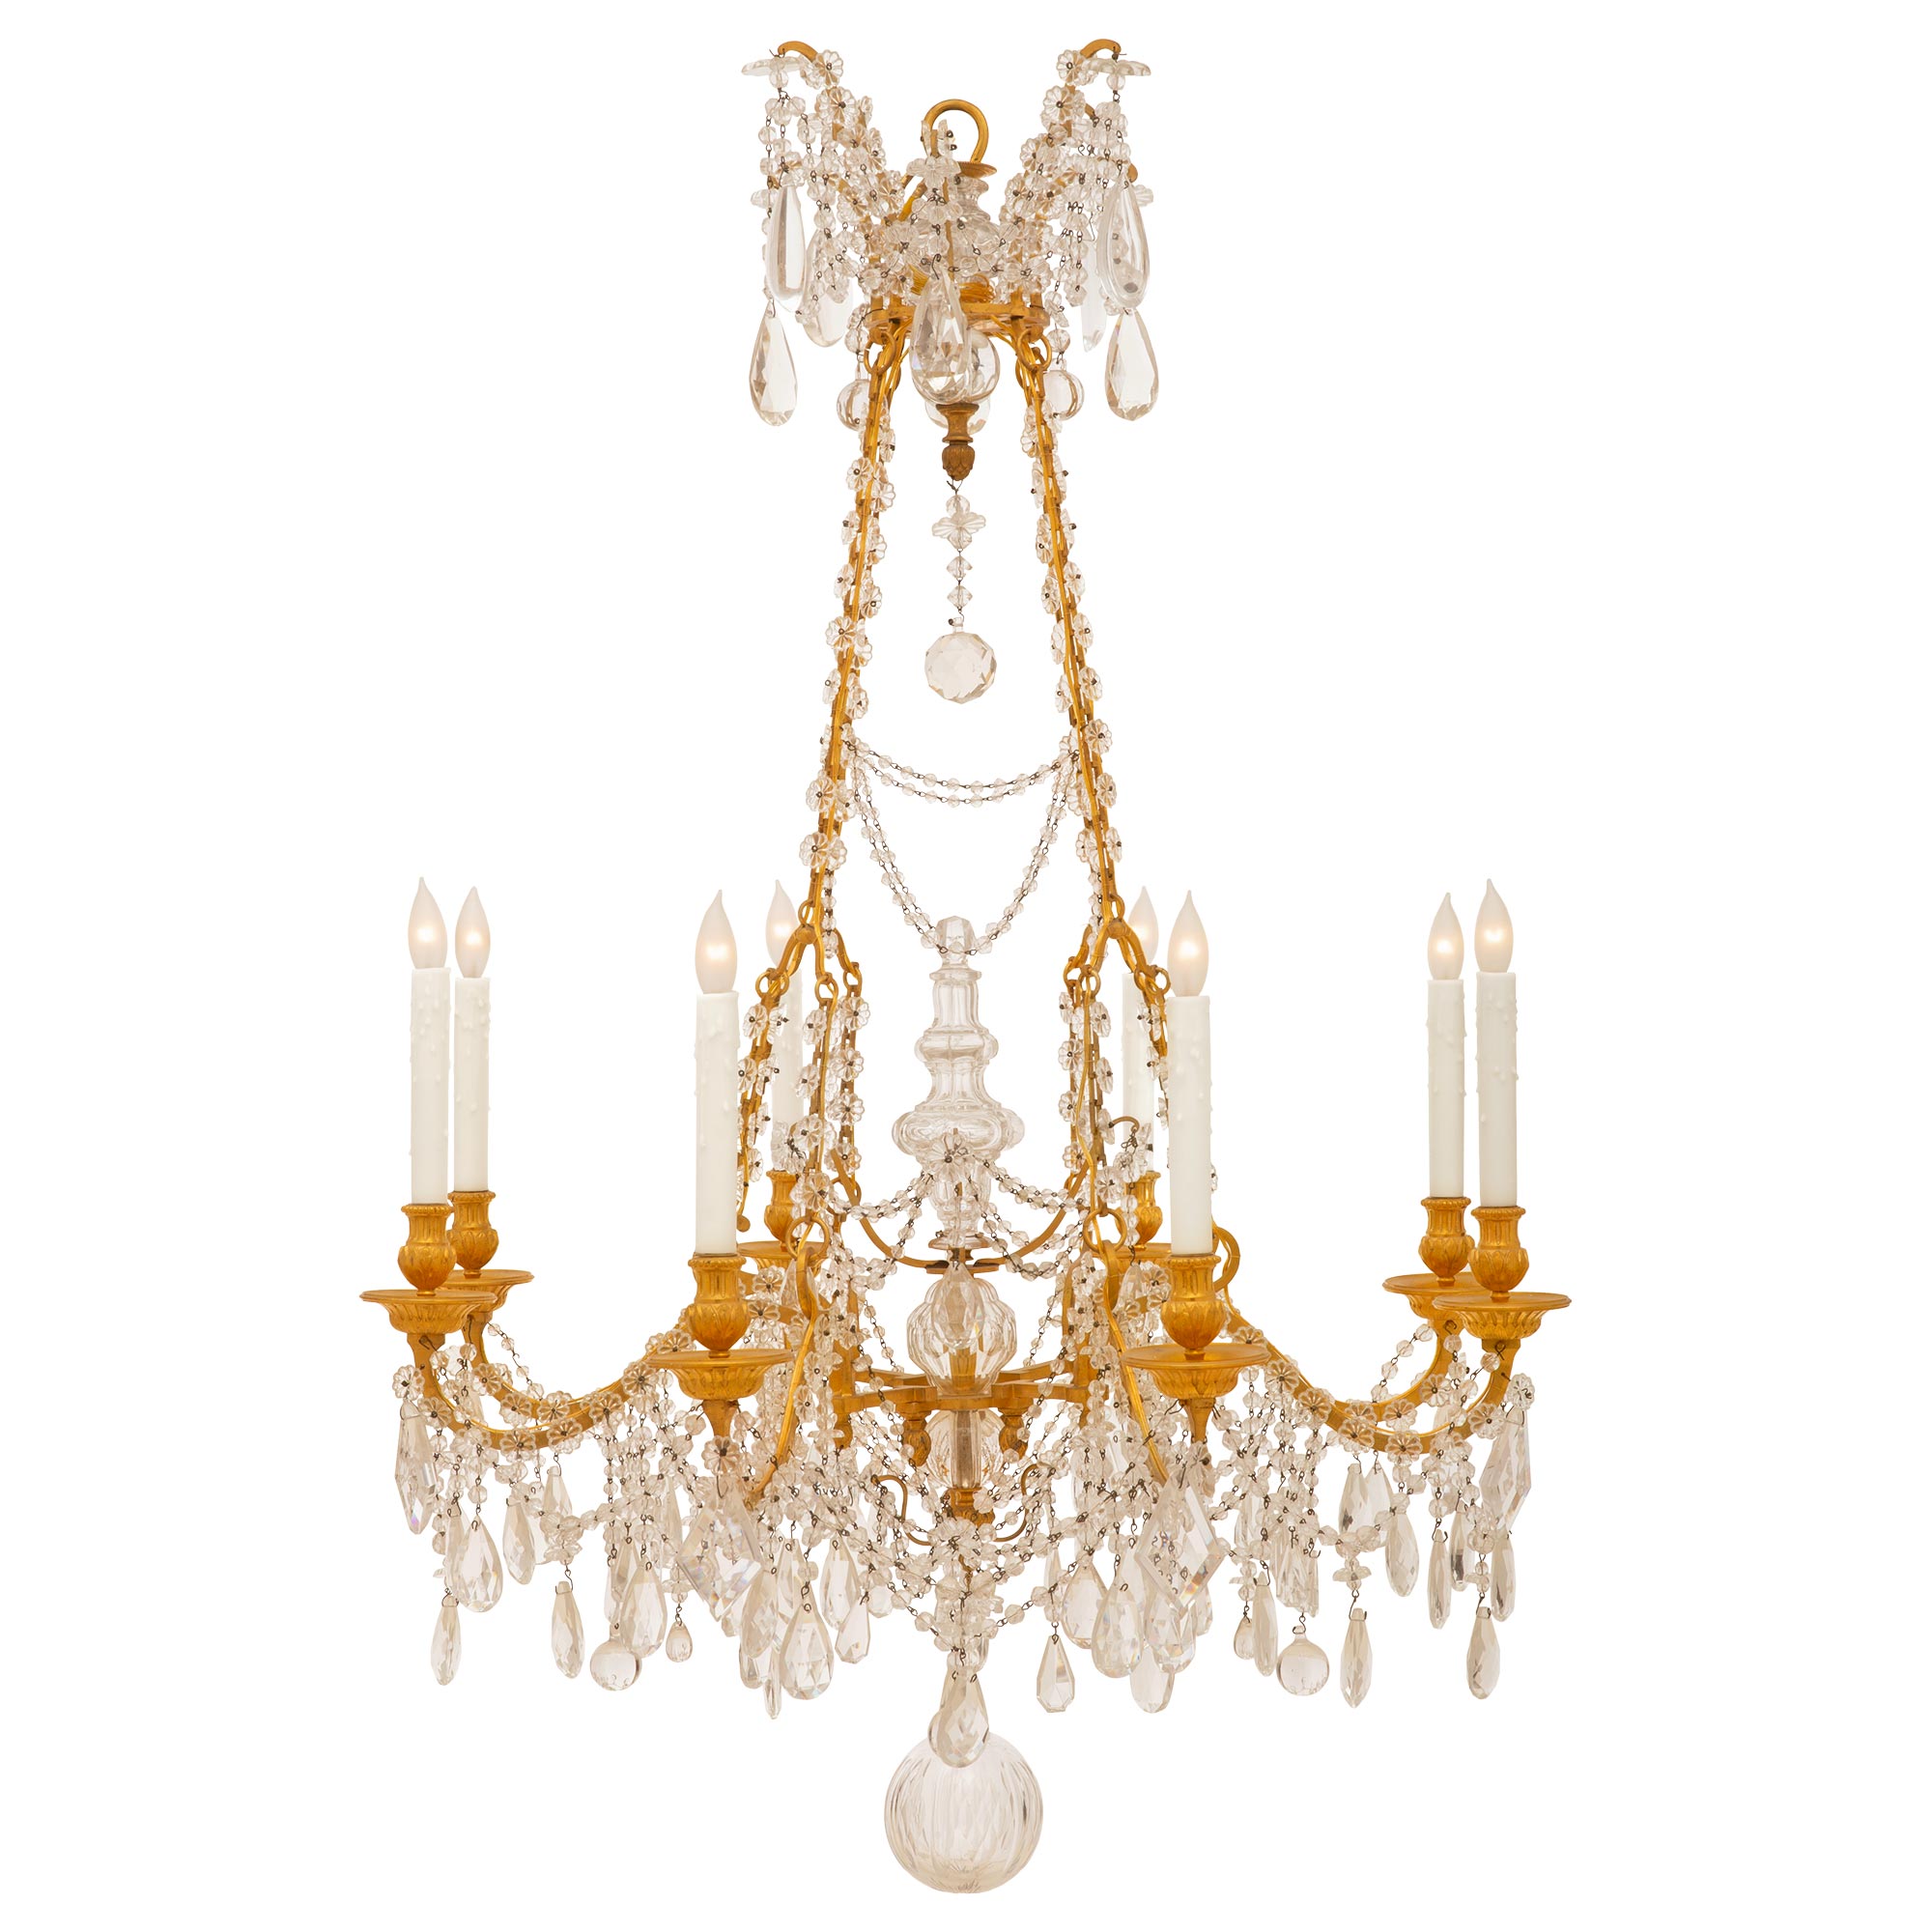 French 19th Century Louis XVI Style Eight-Light Baccarat Crystal Chandelier